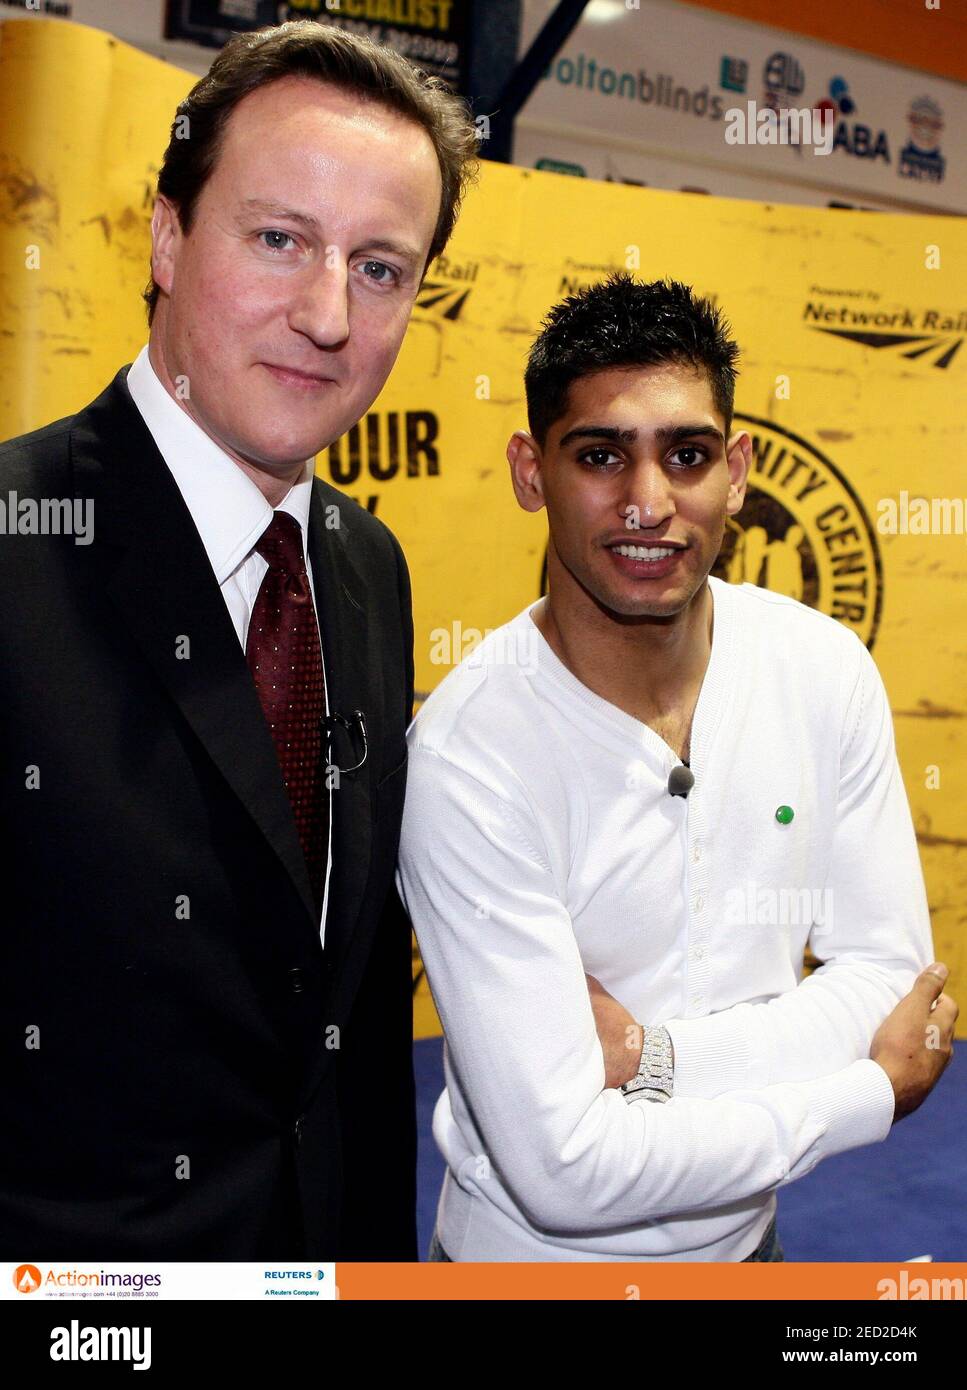 Boxing - Amir Khan launches 'Gloves' community centre in Bolton - Gloves Community Gym and Community Centre - 10/1/08  Amir Khan (R) at the launch with David Cameron MP  Mandatory Credit: Action Images / Jason Cairnduff  Livepic Stock Photo